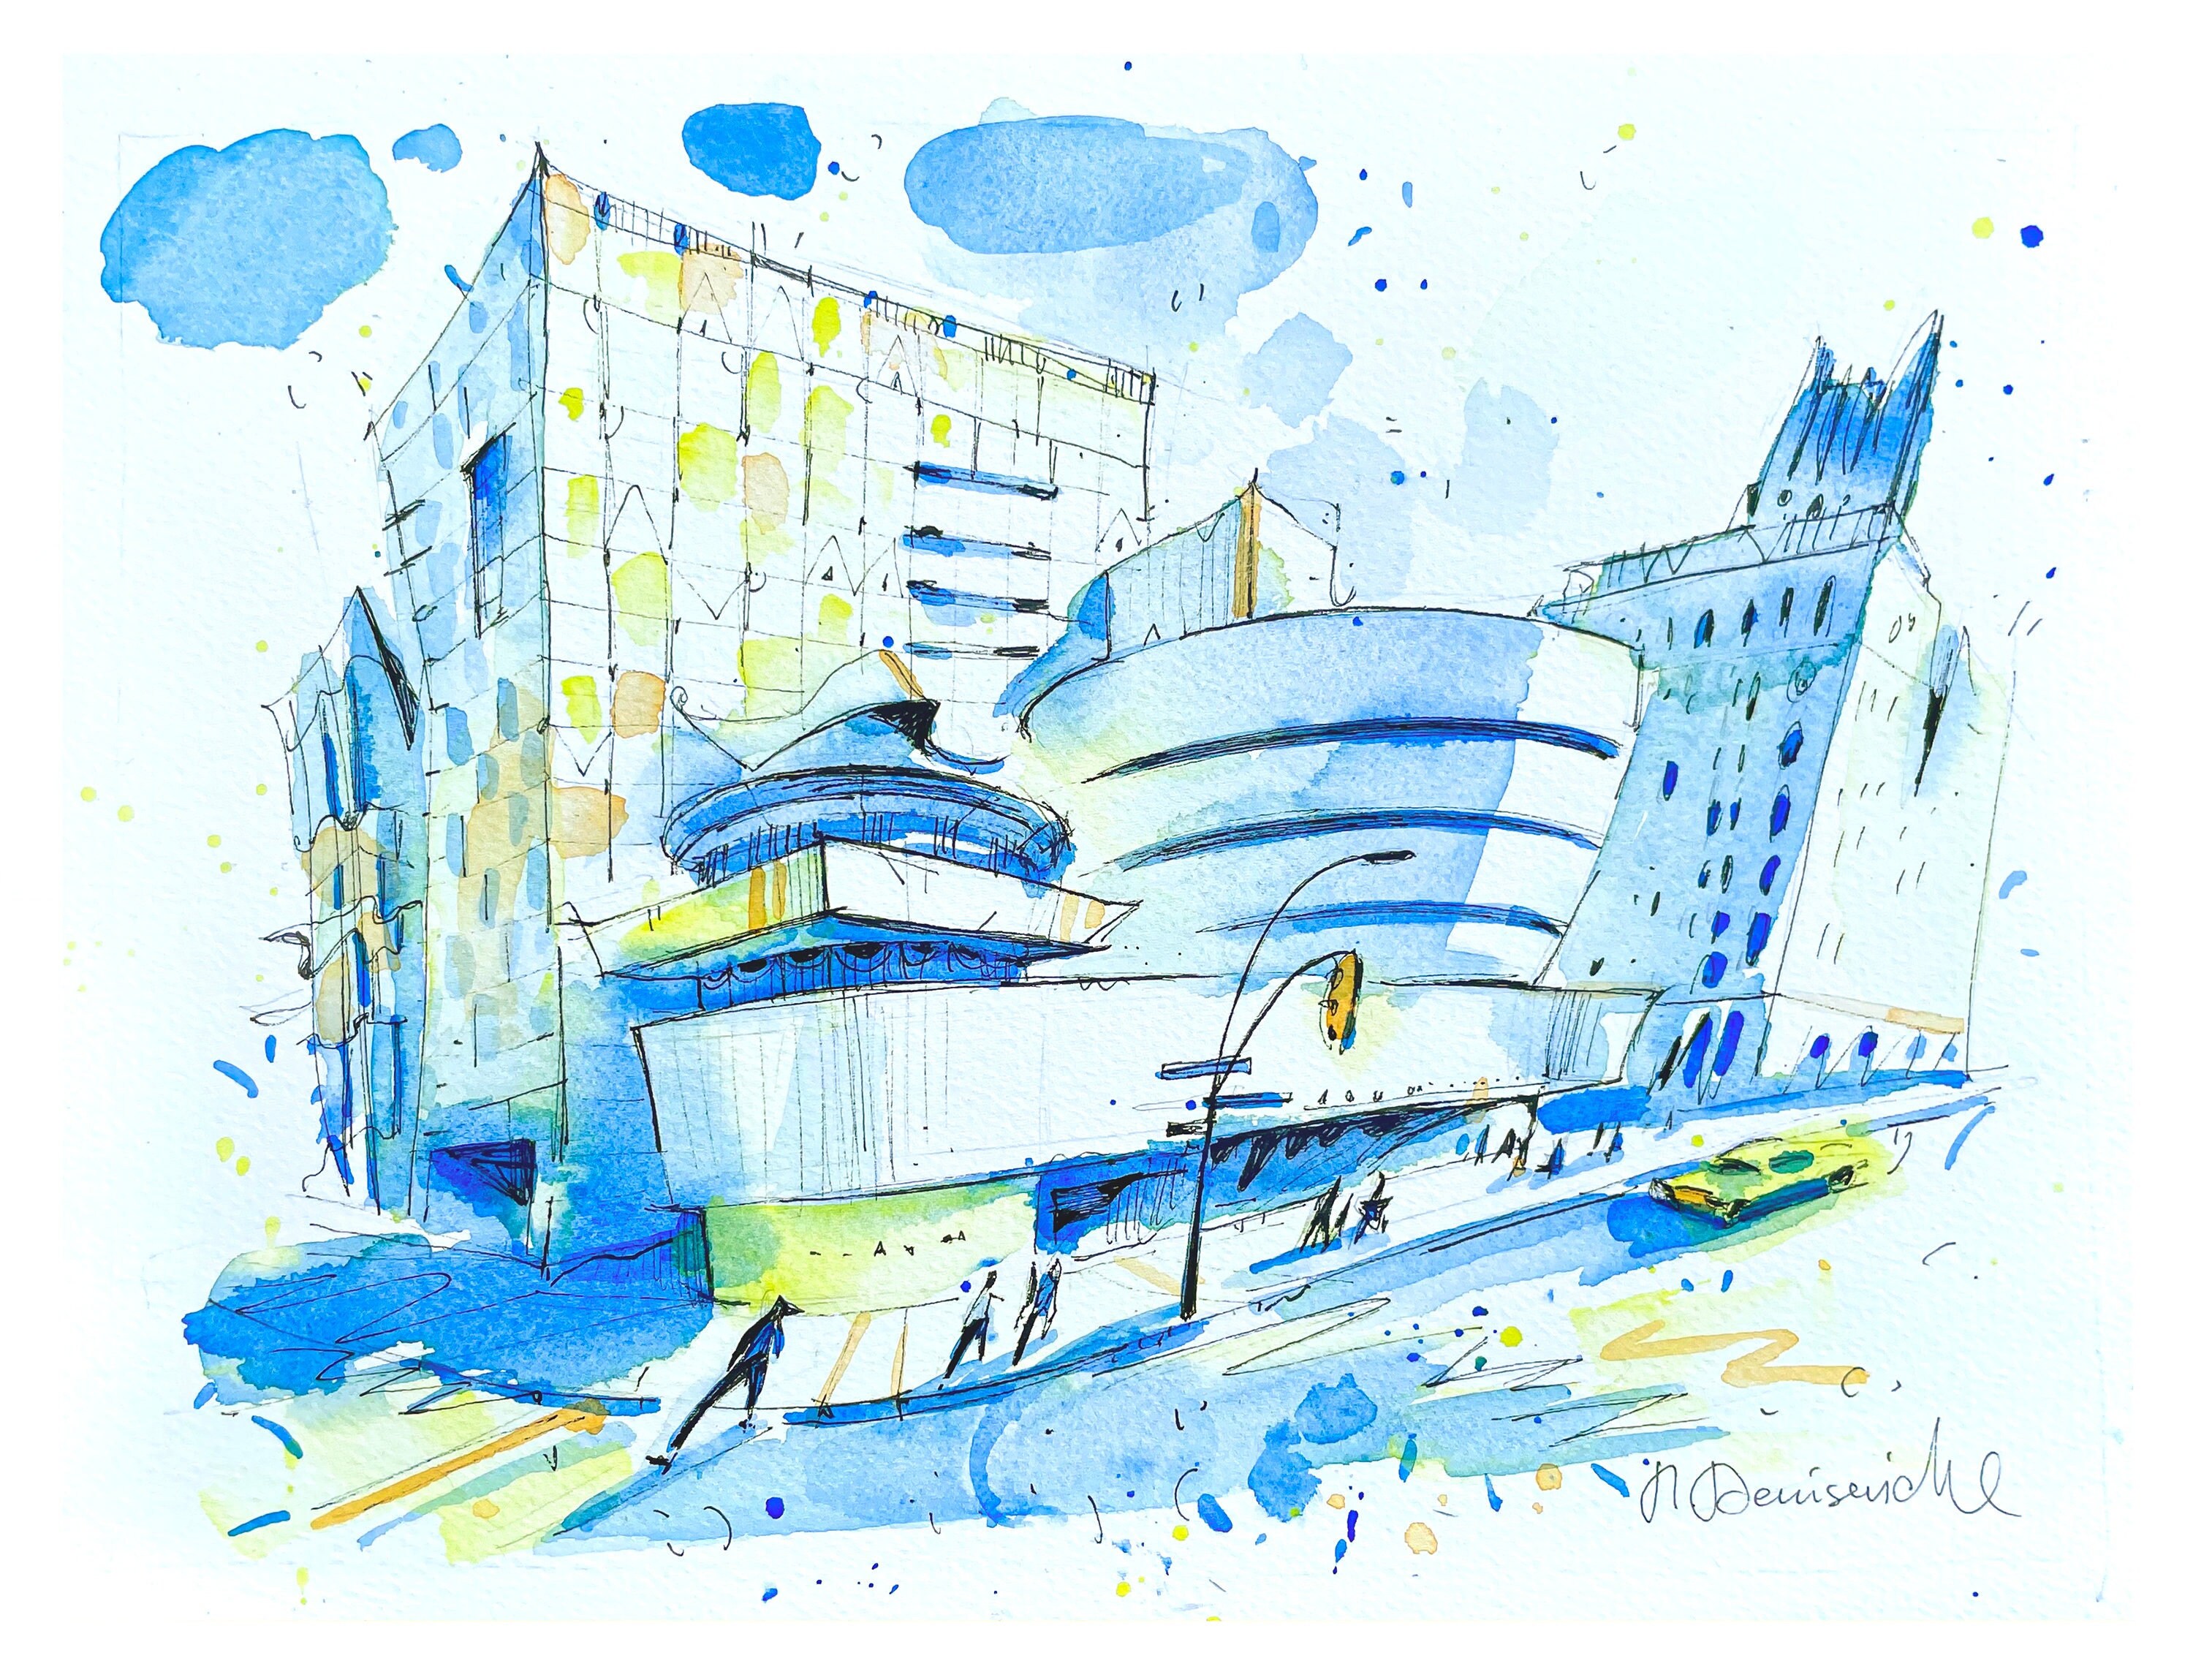 Guggenheim Museum Building Original Watercolor Painting Hand Painted Artwork Wall Art New Your City NYC Watercolour